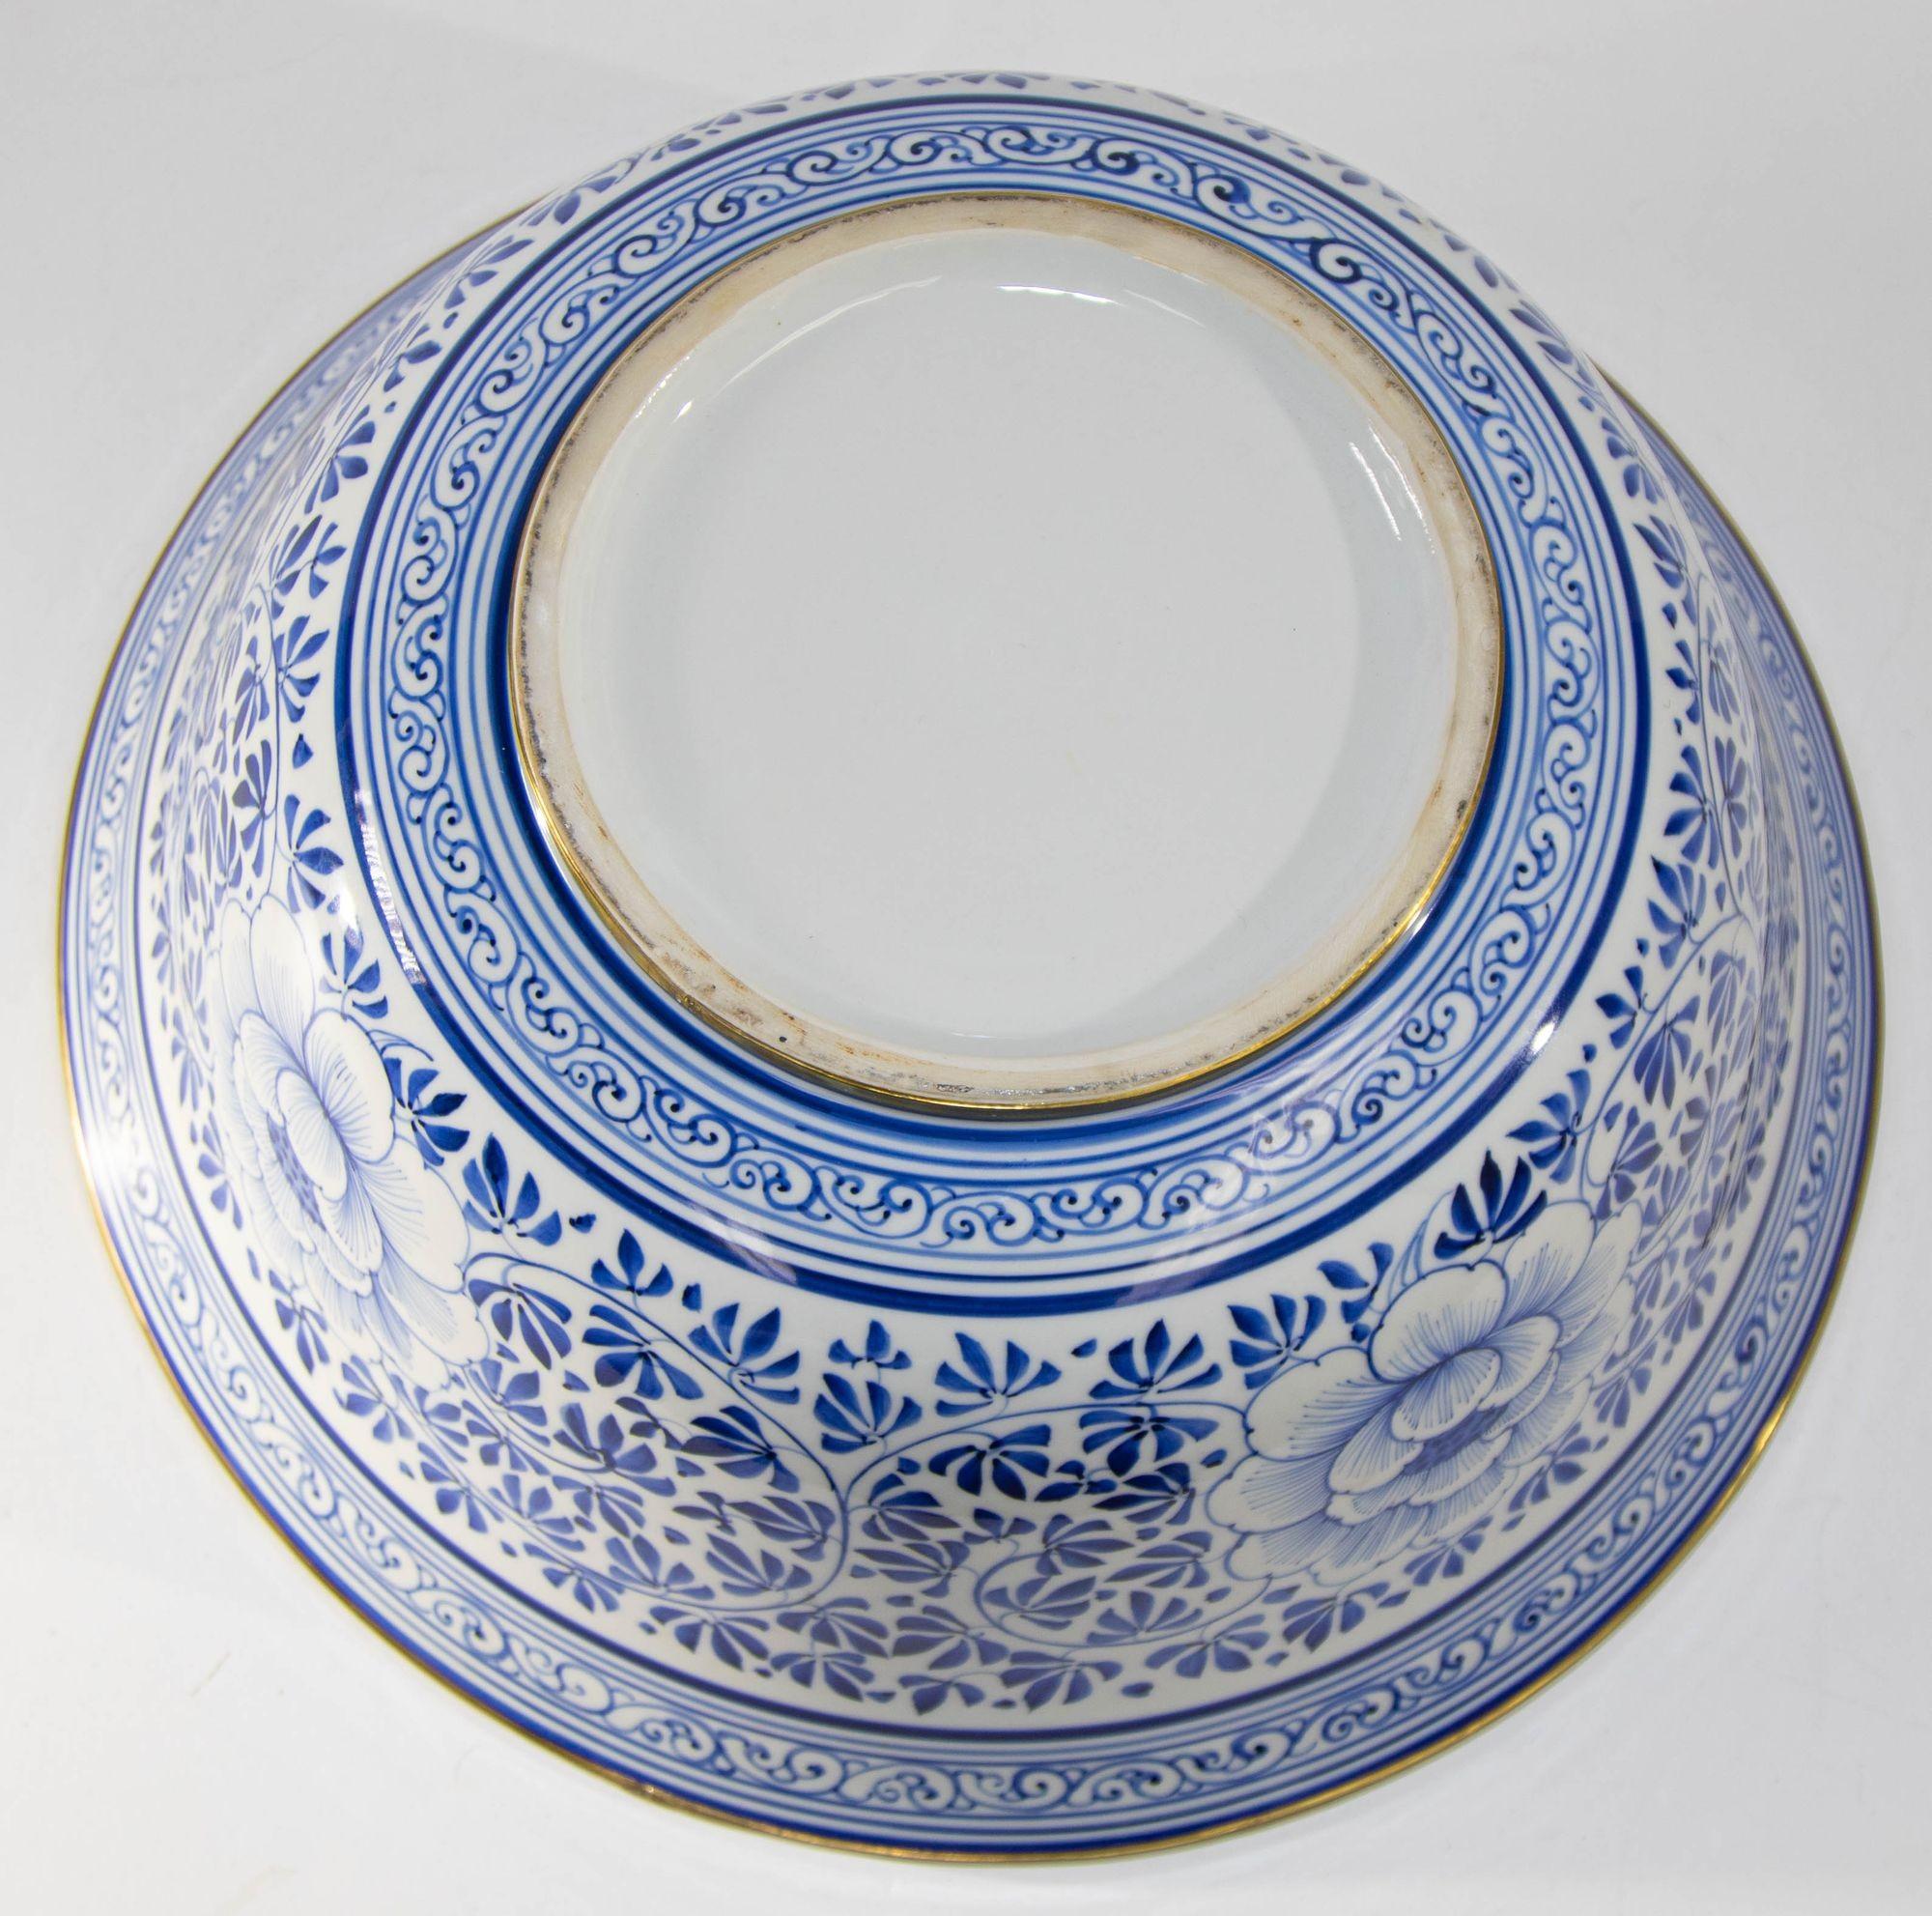 Chinoiserie Vintage Maitland Smith Blue and White Large Porcelain Bowl in Floral Pattern For Sale